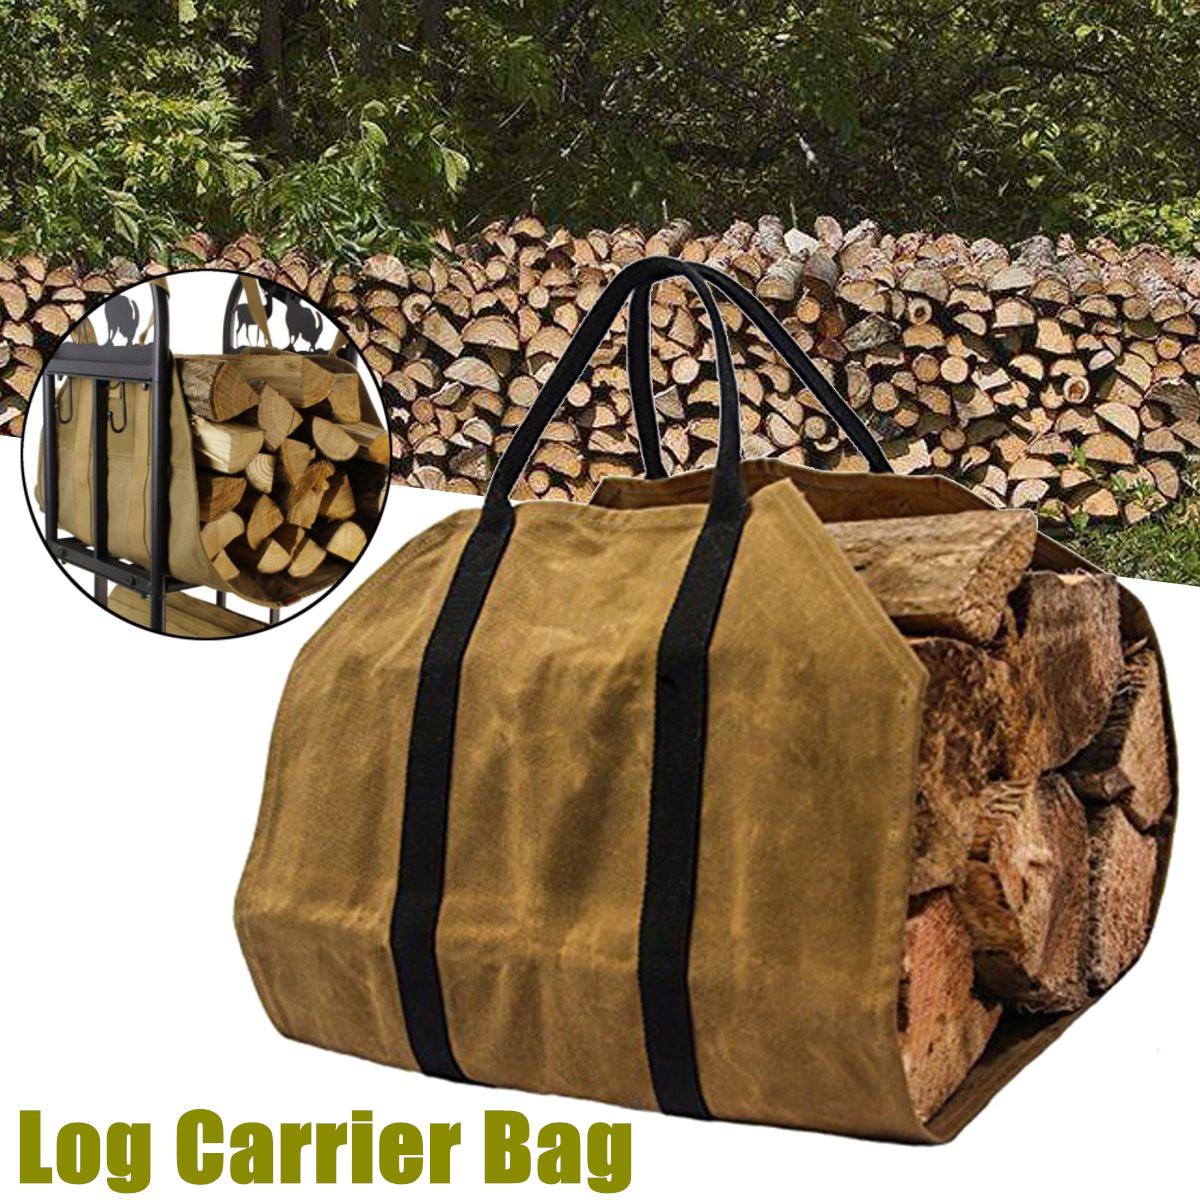 khaki-Firewood-Carrier-Log-Carrier-Wood-Carrying-Bag-for-Fireplace-16oz-Waxed-Canvas-1388831-1